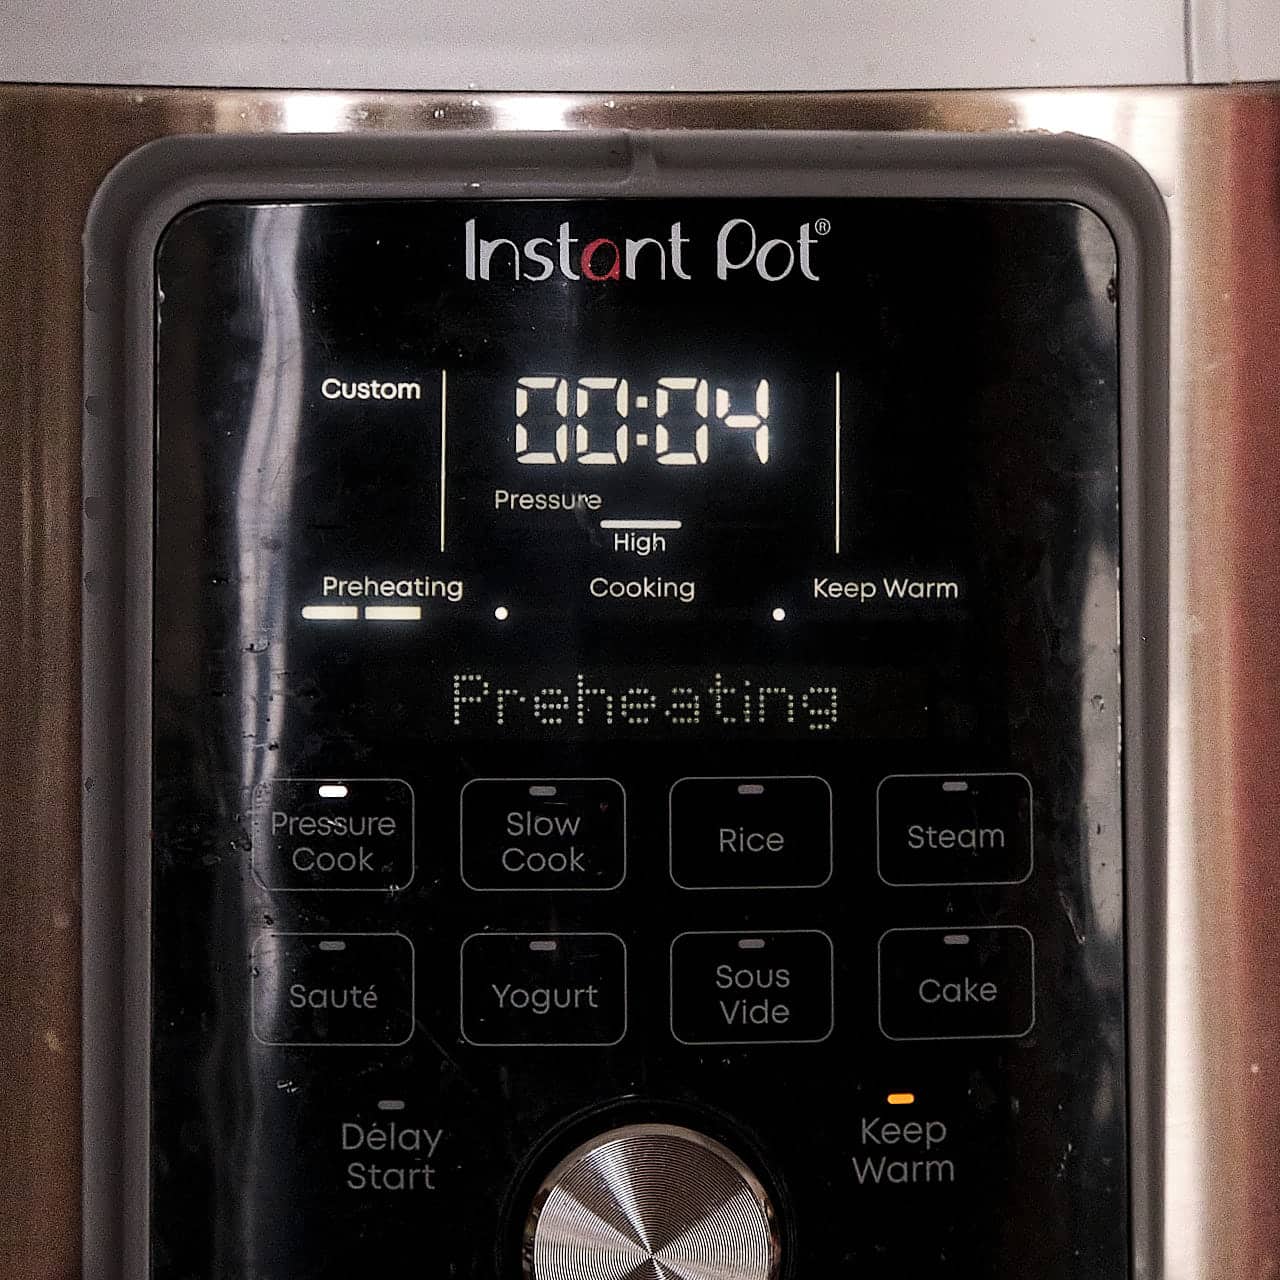 An Instant Pot set to pressure cook for 4 minutes